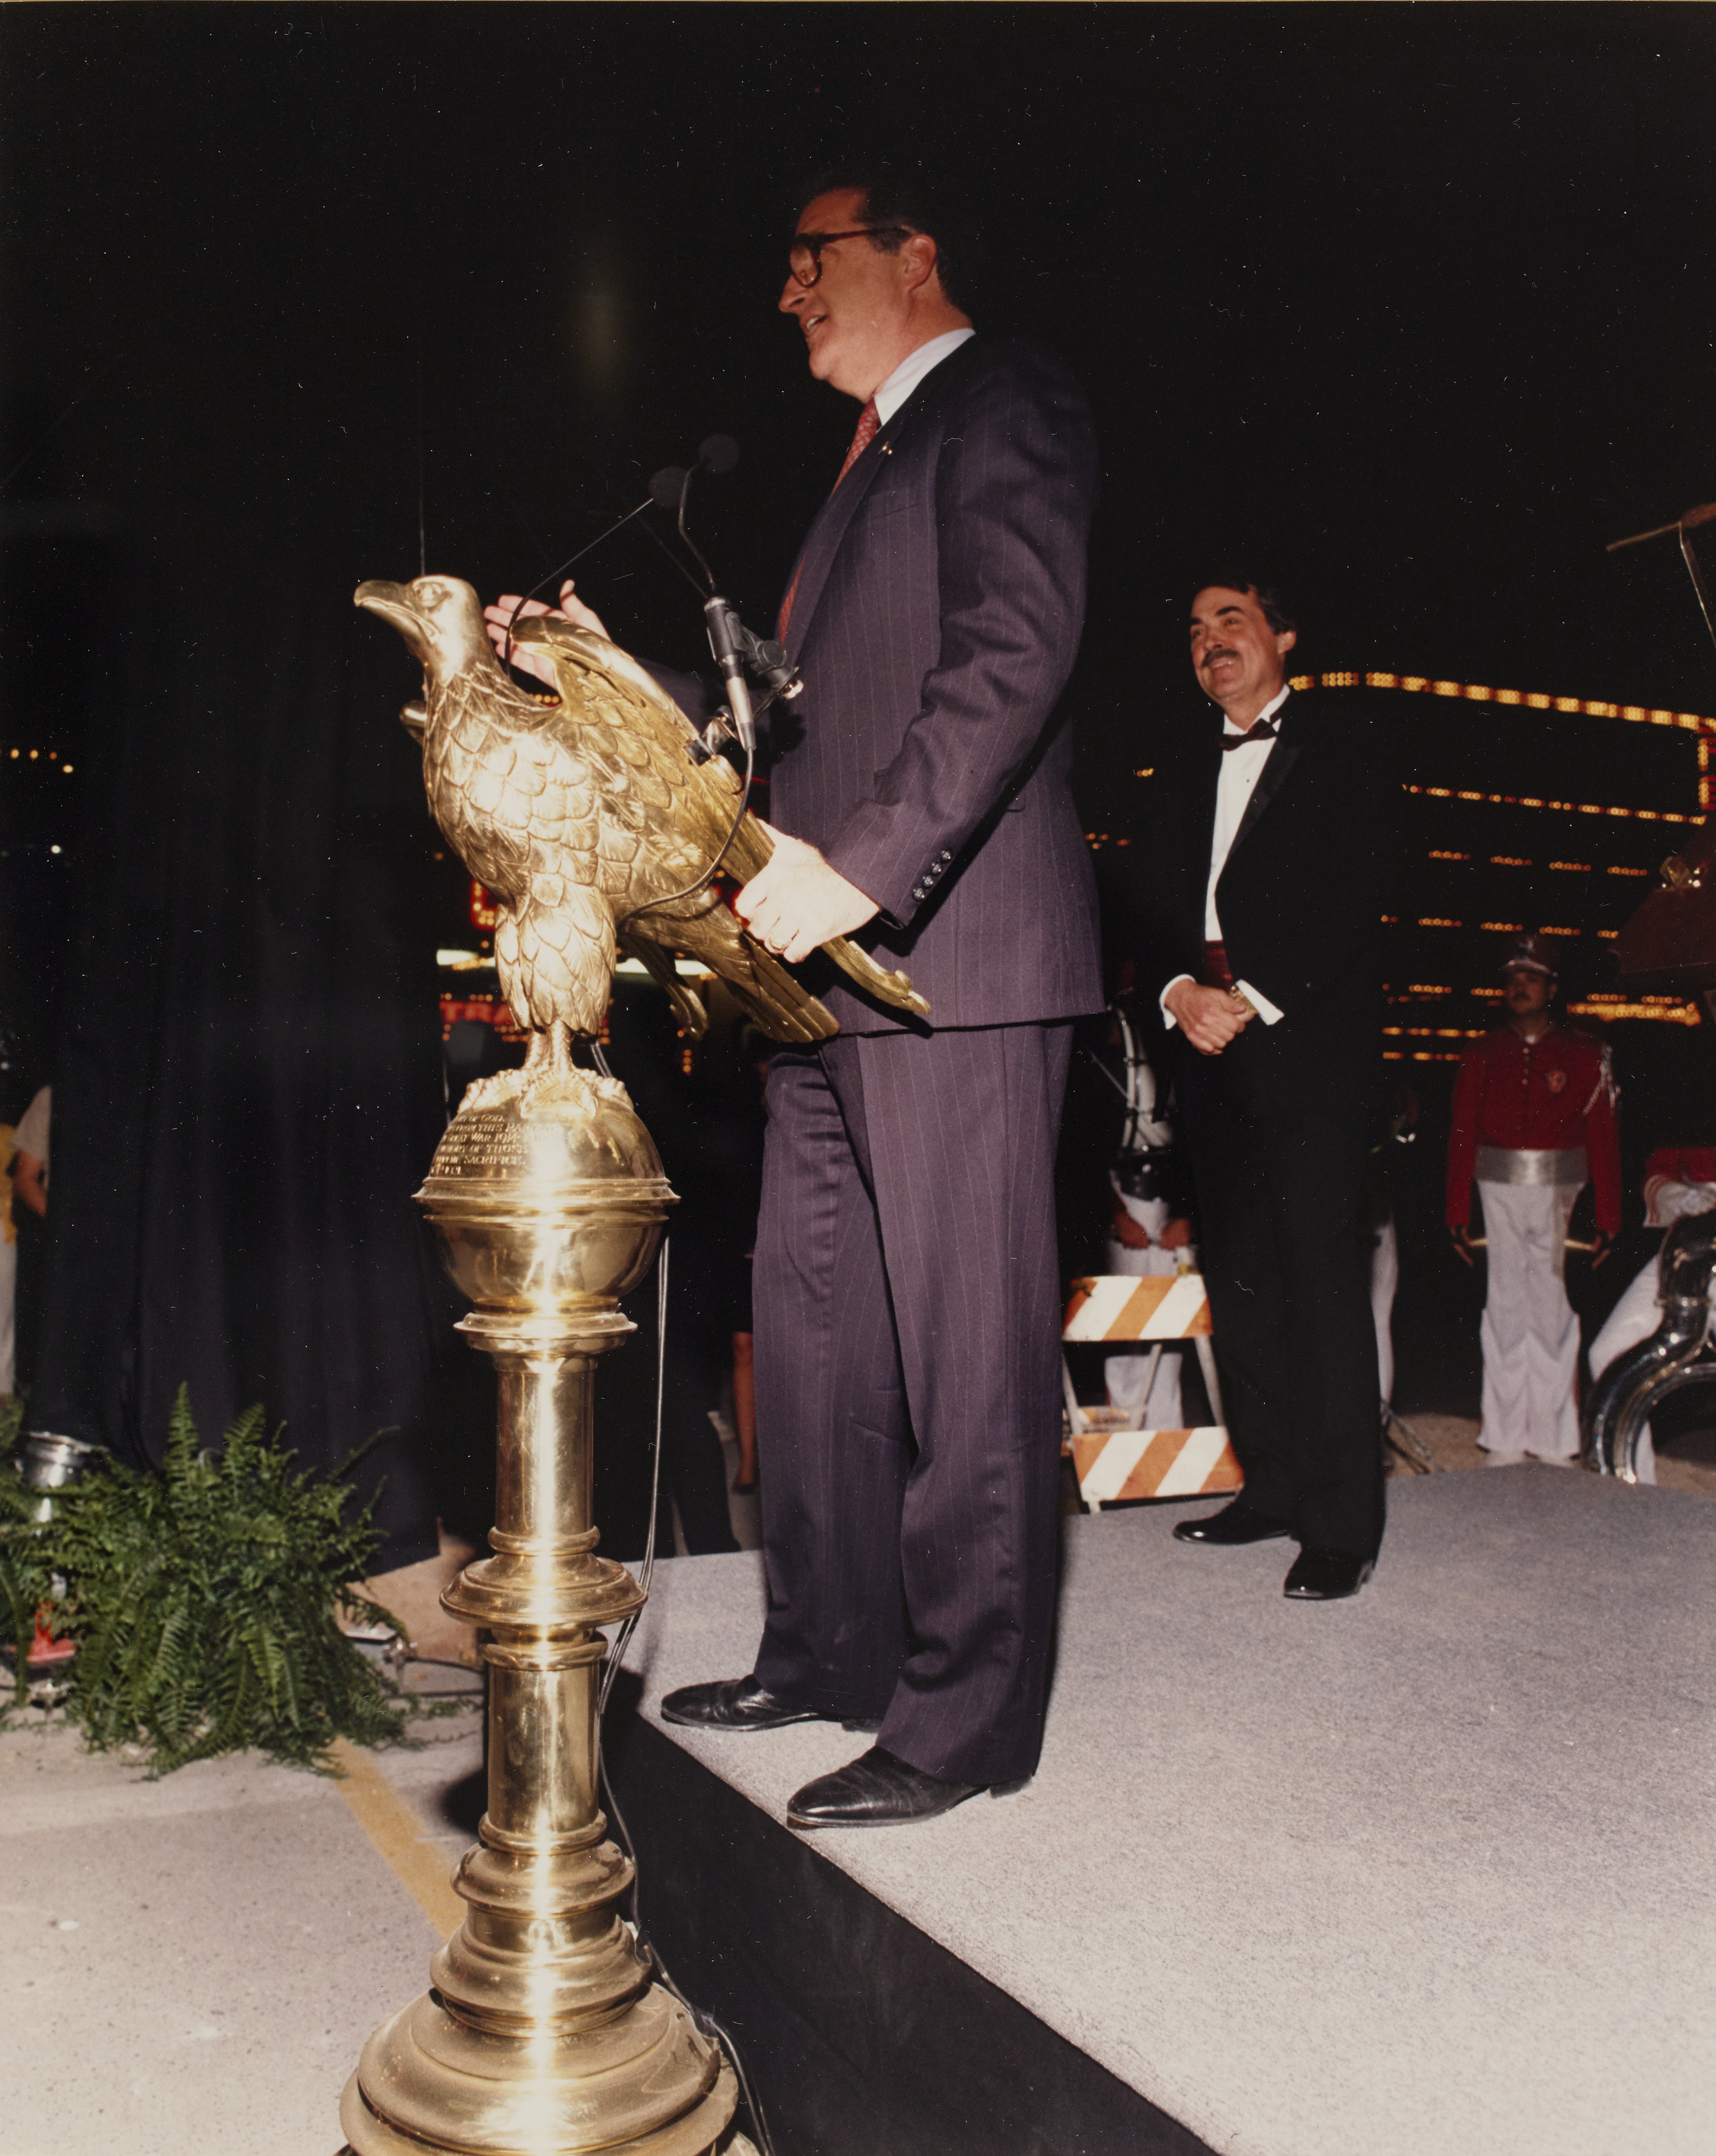 Photograph of Ron Lurie at eagle podium during ground breaking ceremony, 1990